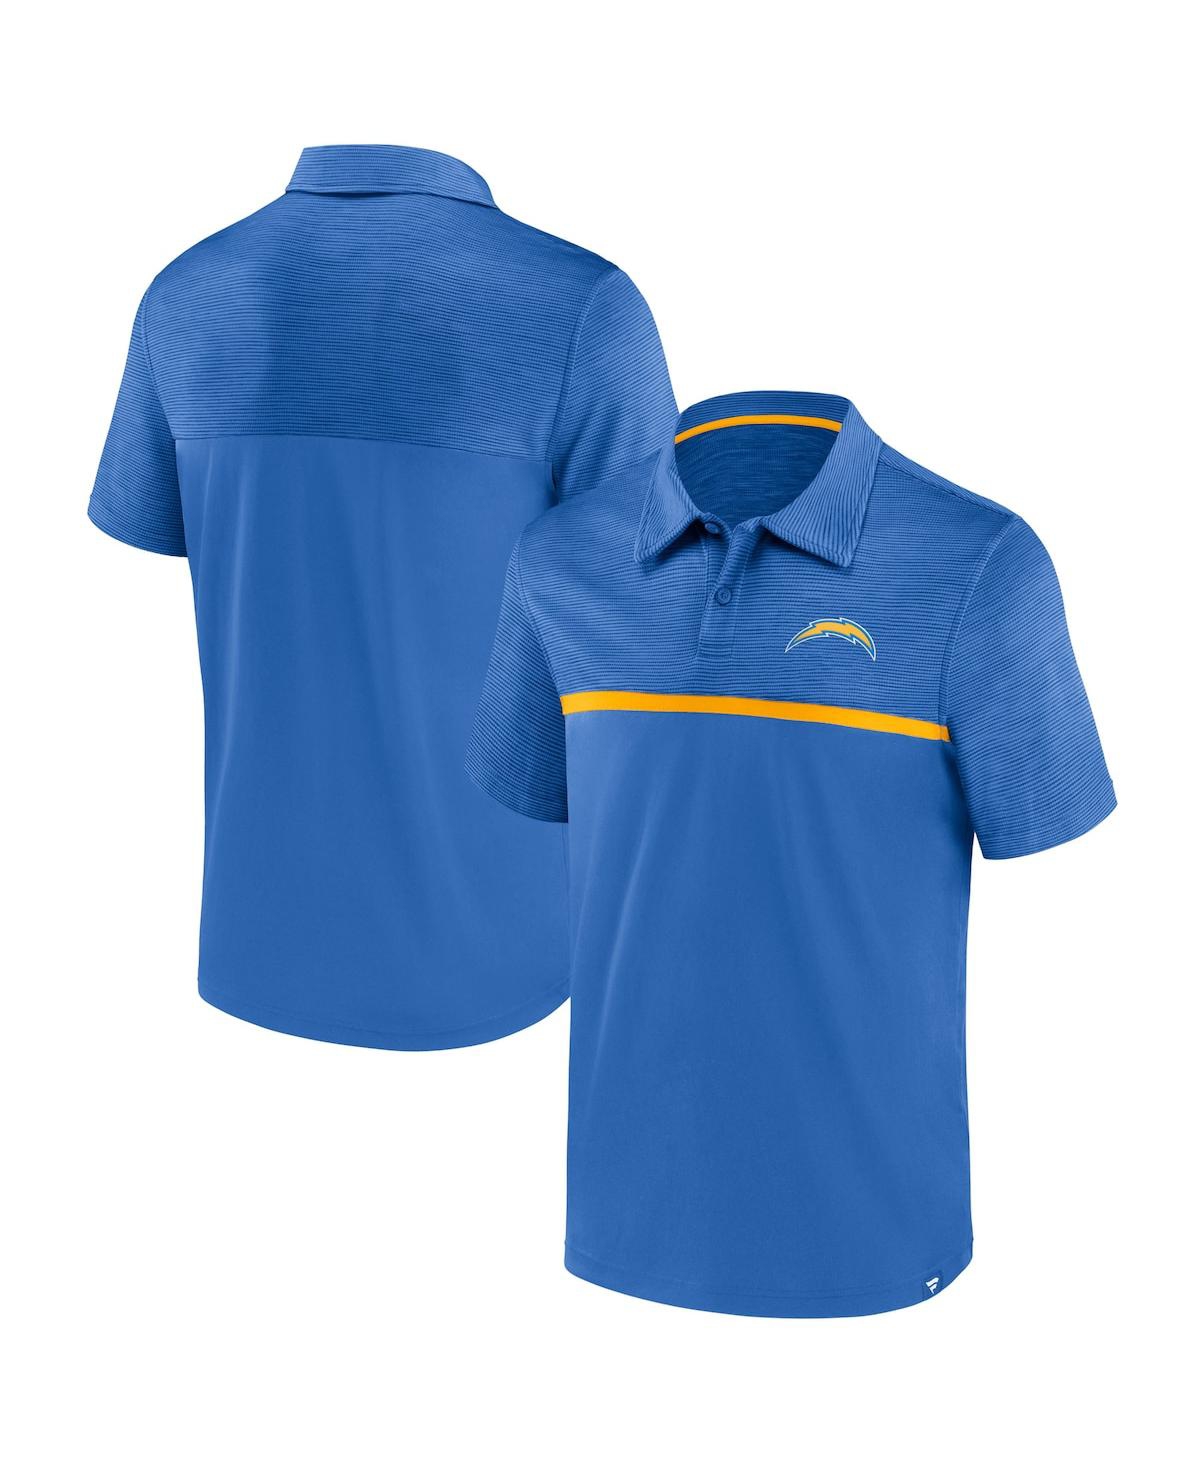 Fanatics Men's  Powder Blue Los Angeles Chargers Primary Polo Shirt